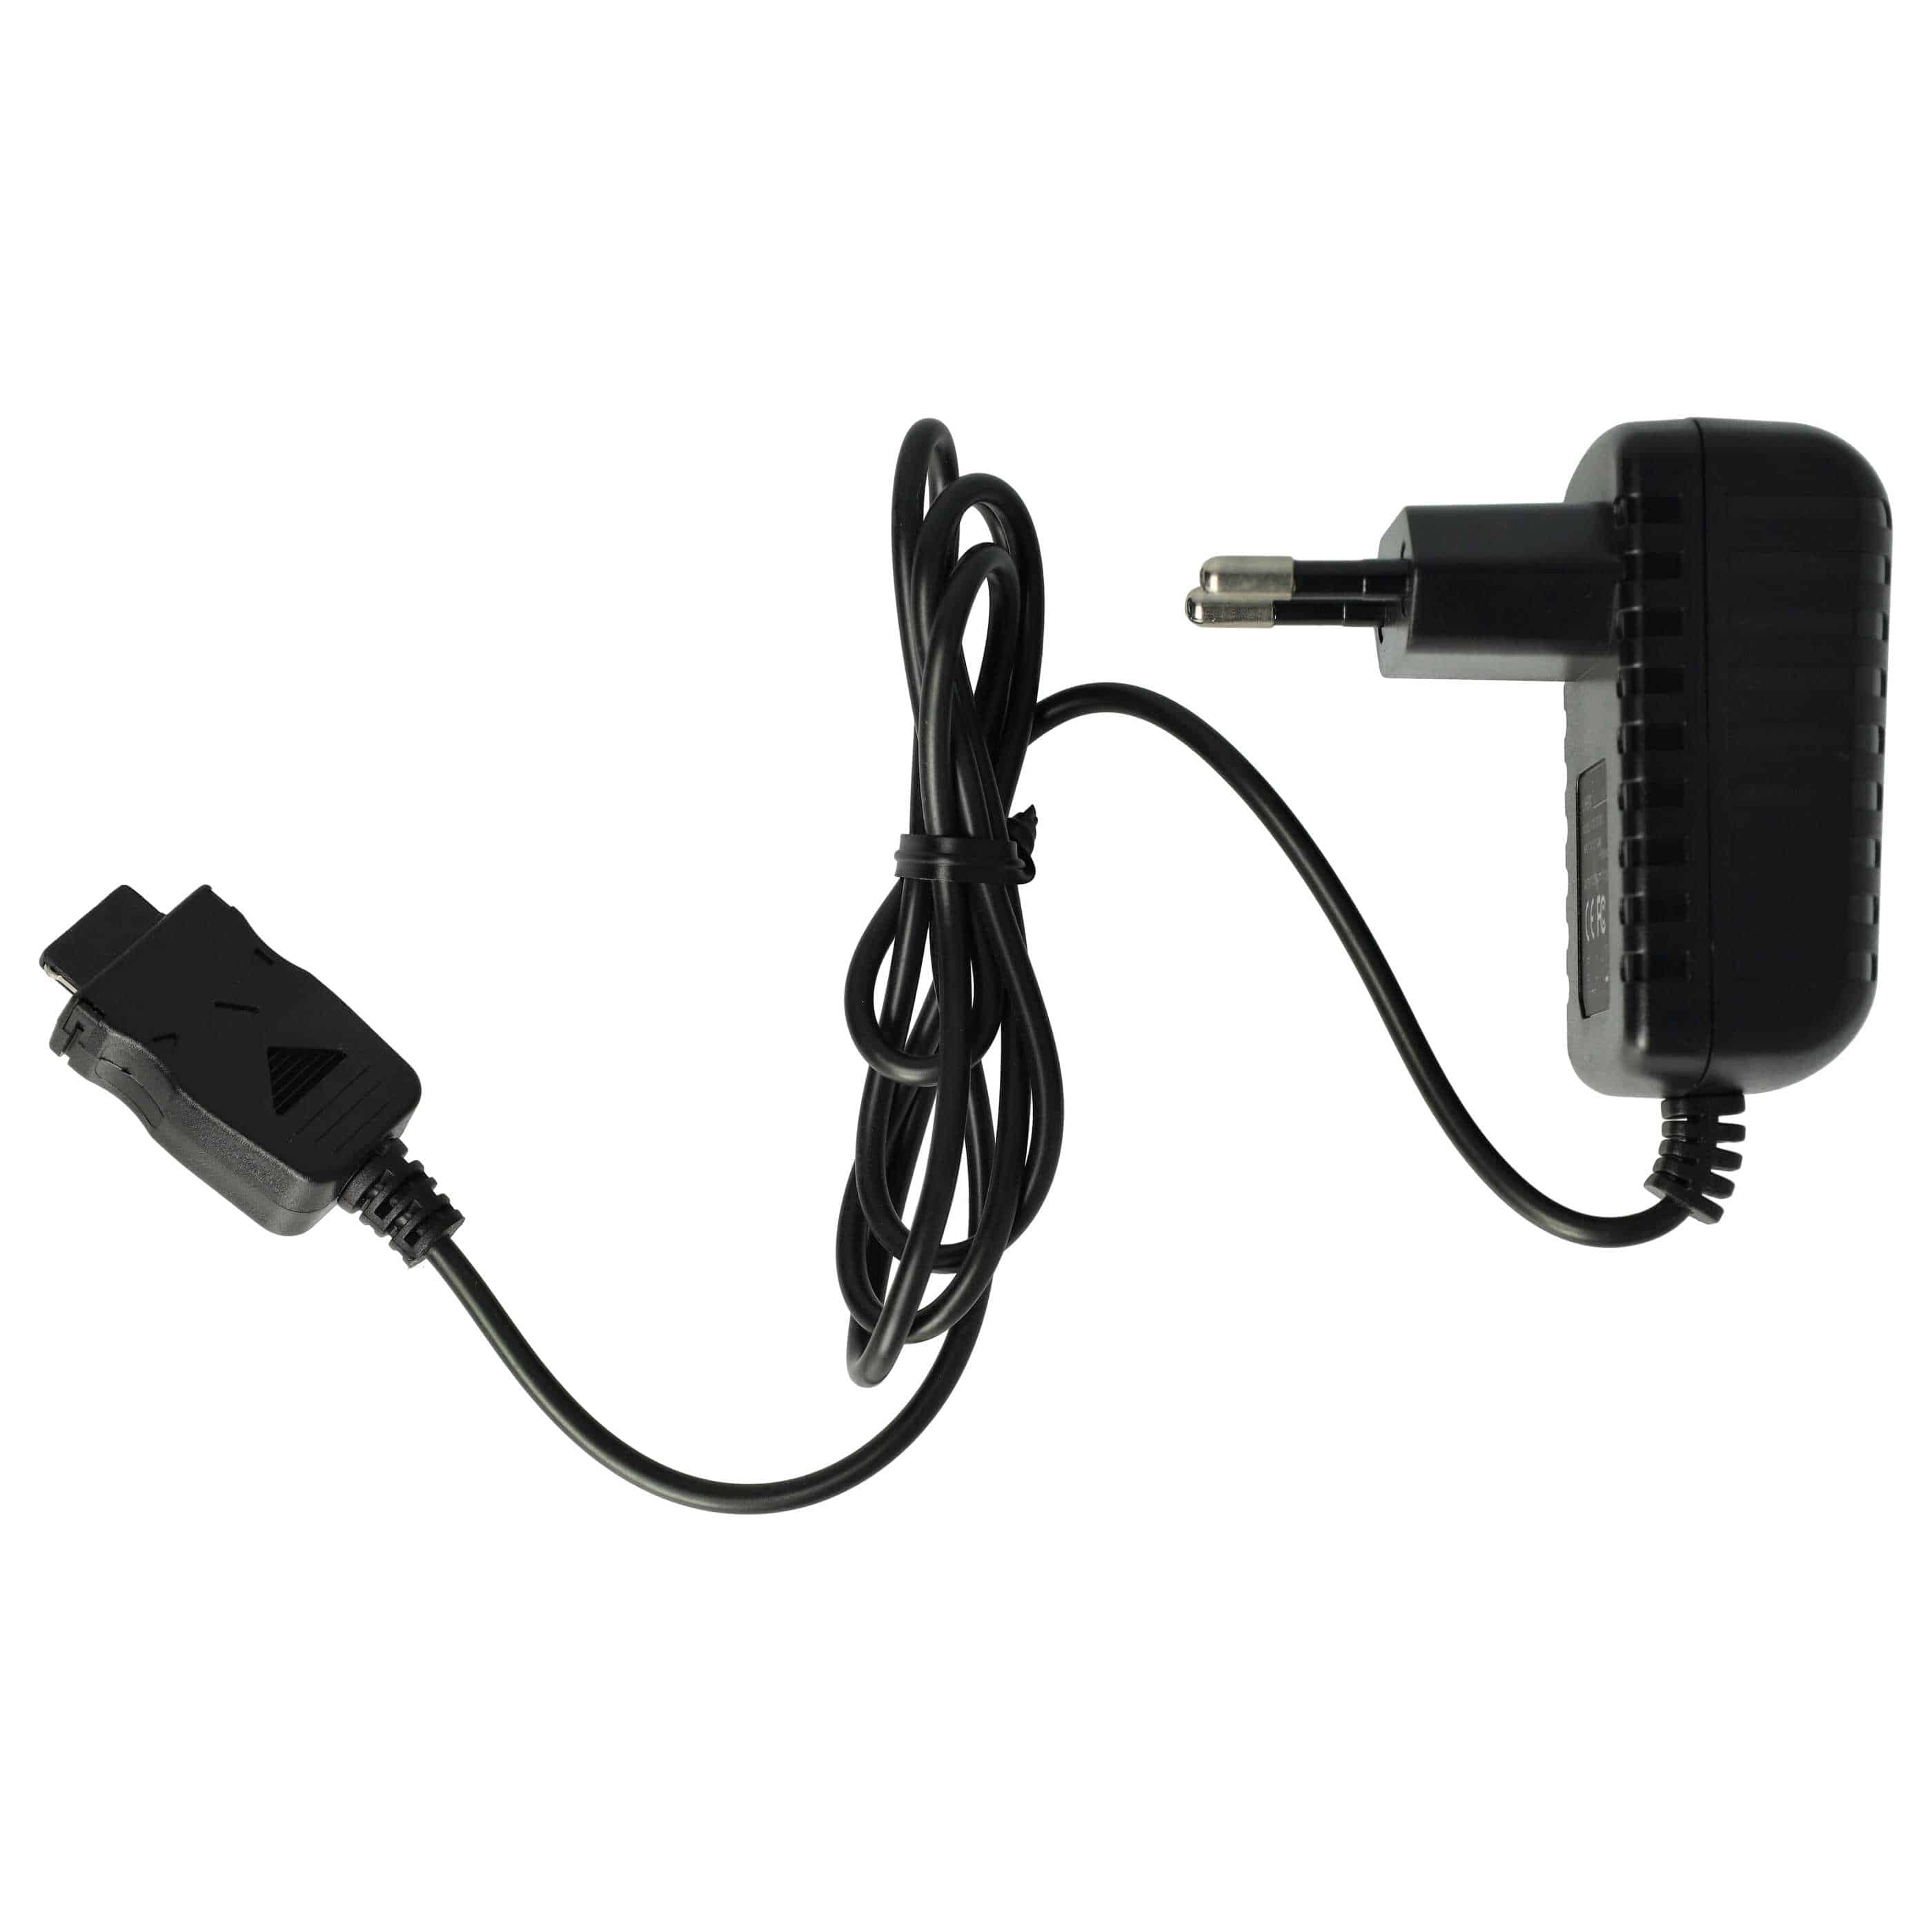 Caricabatterie 110-220 V per Anycool, Samsung D66cellulare ecc